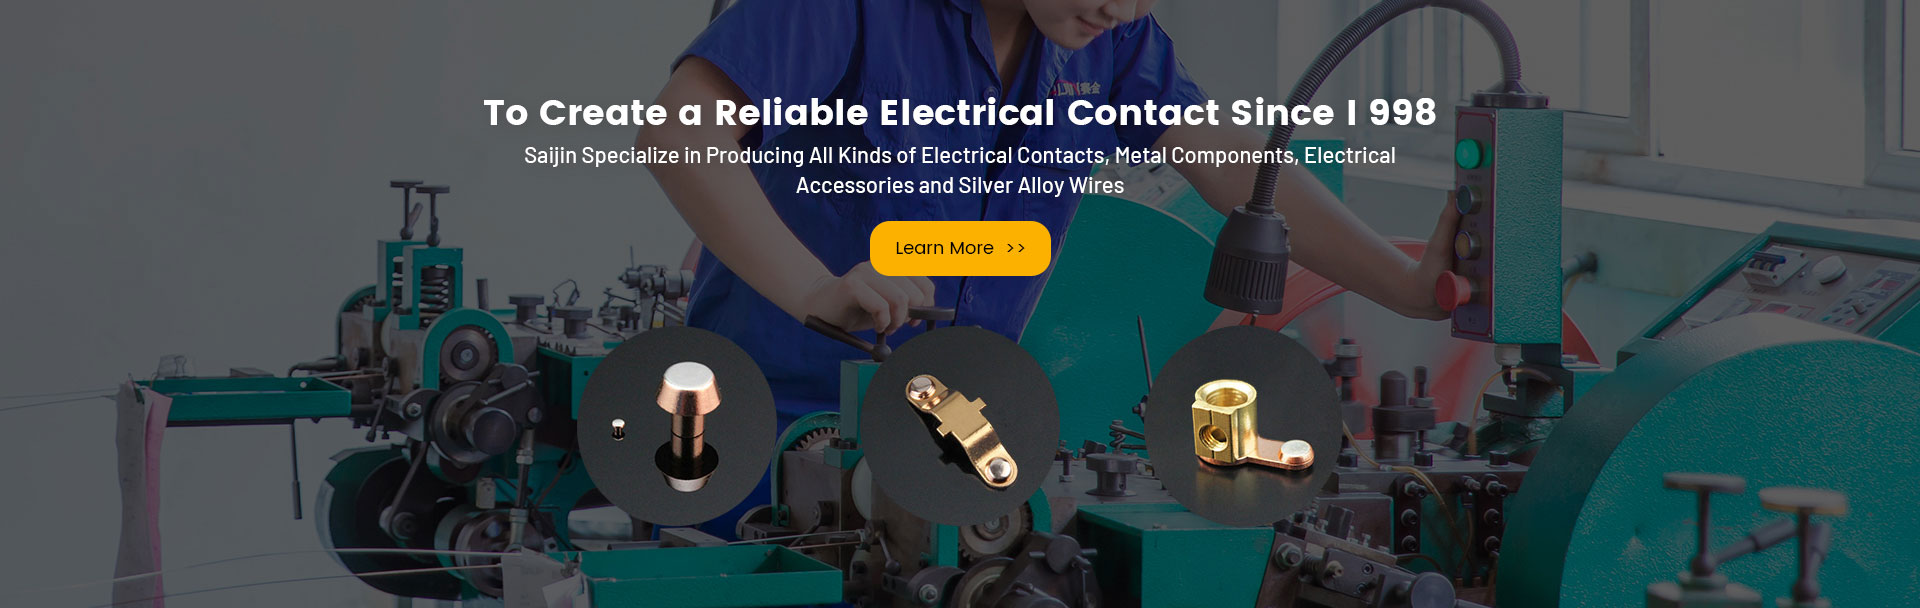 To Create a Reliable Electrical Contact Since 1998